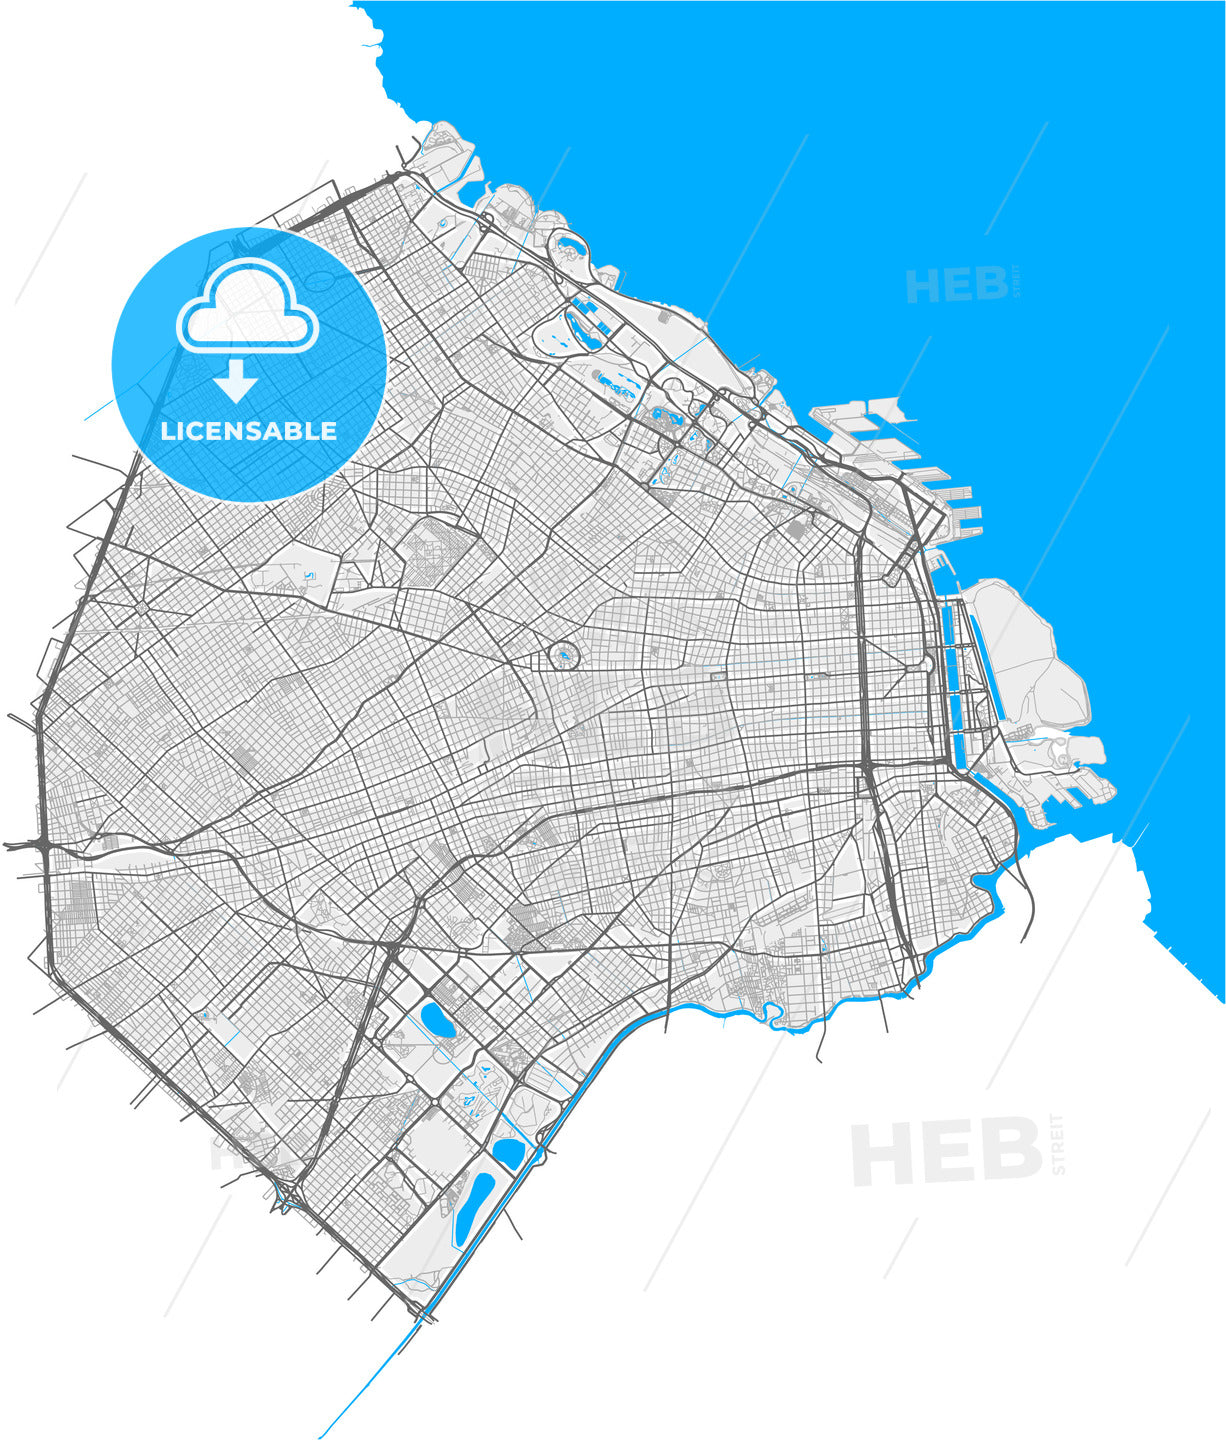 Buenos Aires, Argentina, high quality vector map